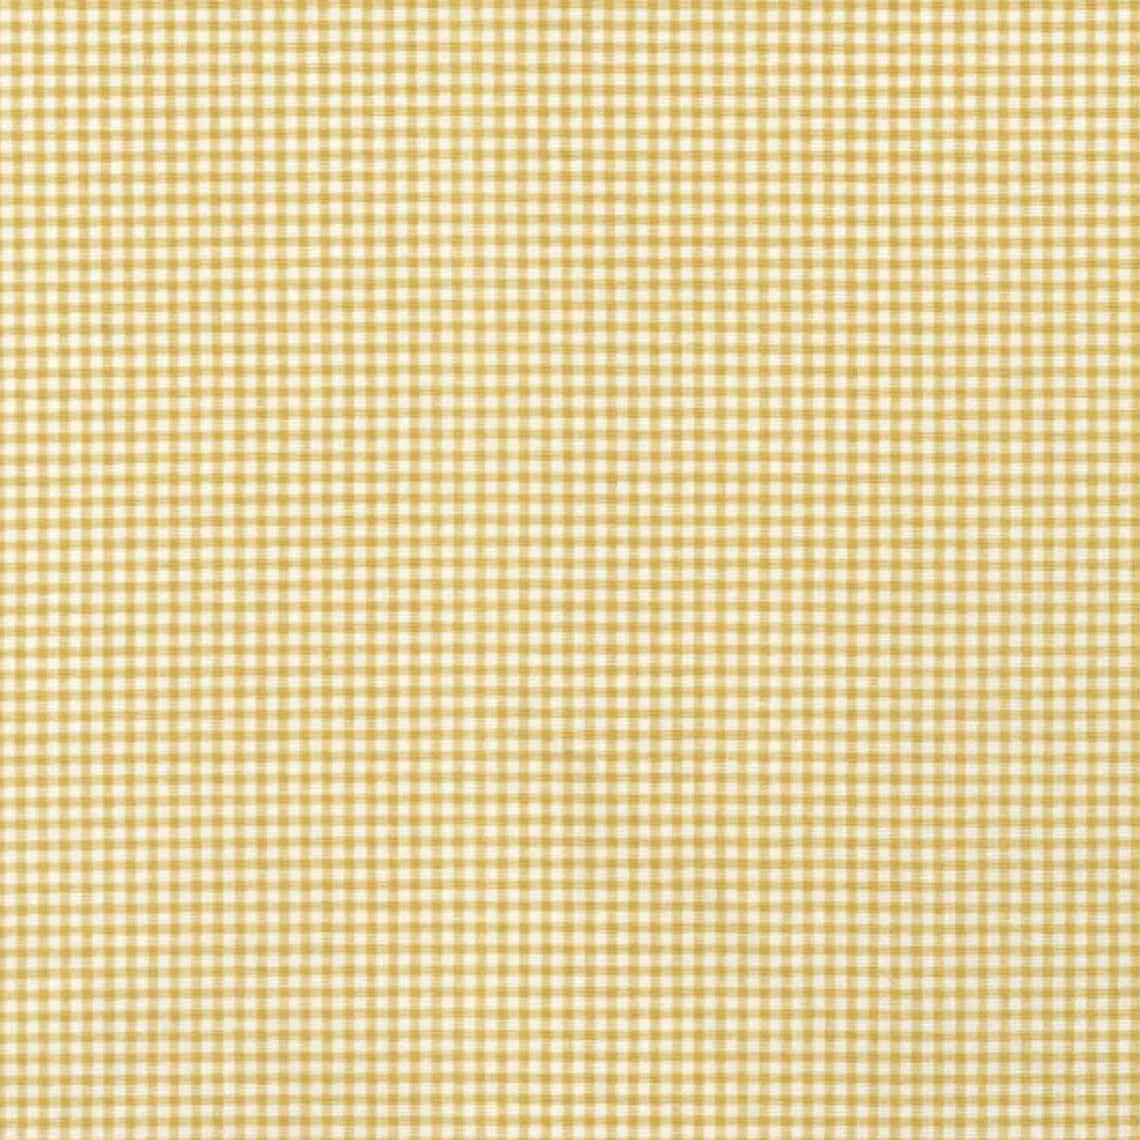 tailored crib skirt in farmhouse barley yellow gold gingham check